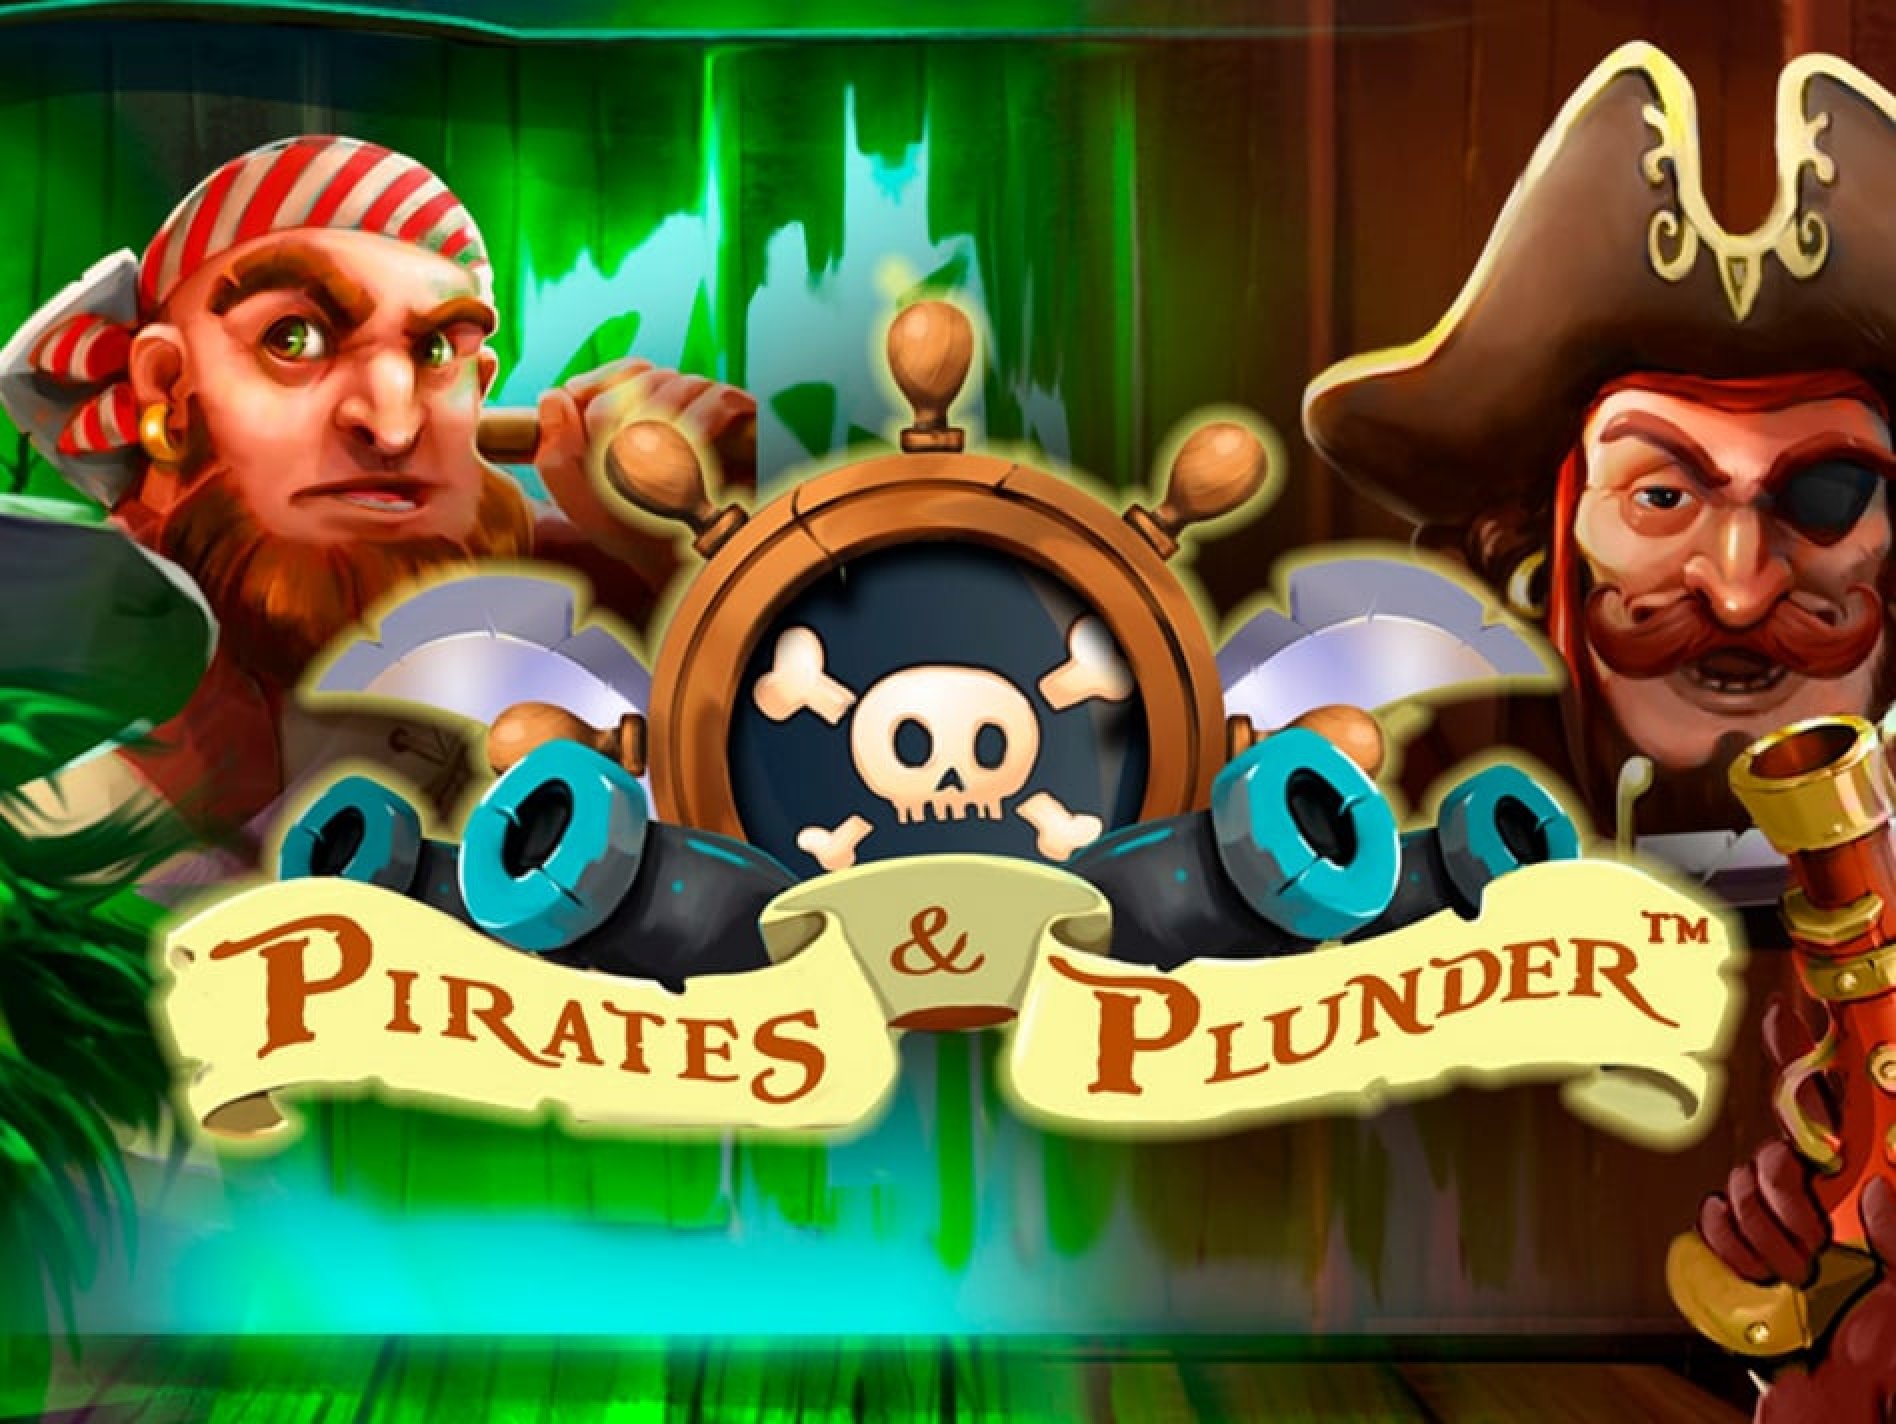 Pirates and Plunder demo